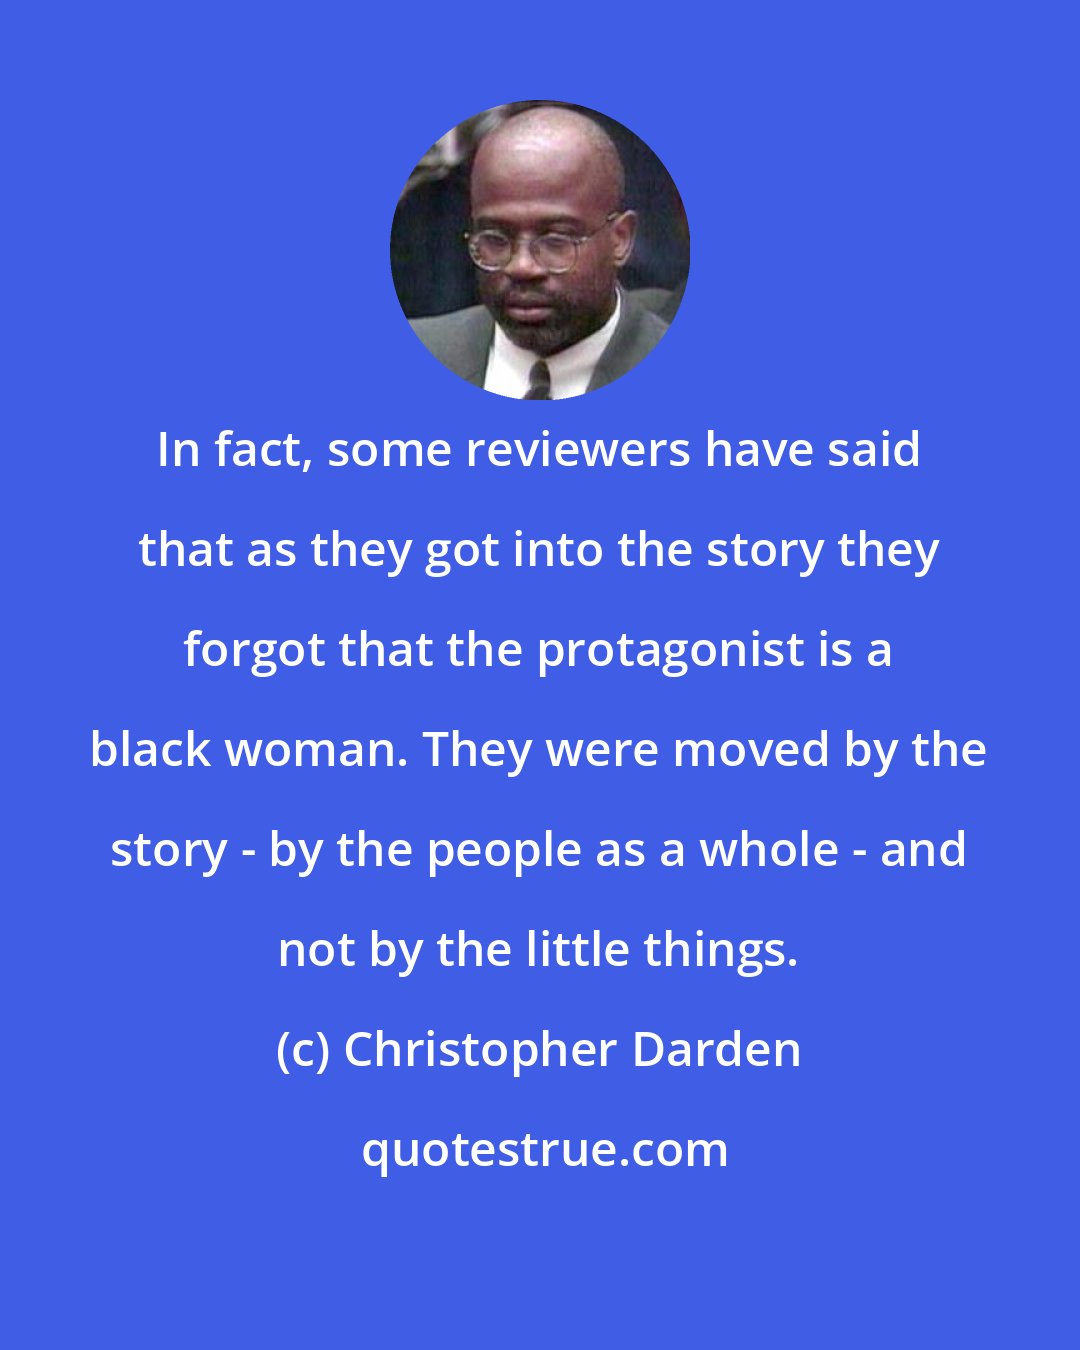 Christopher Darden: In fact, some reviewers have said that as they got into the story they forgot that the protagonist is a black woman. They were moved by the story - by the people as a whole - and not by the little things.